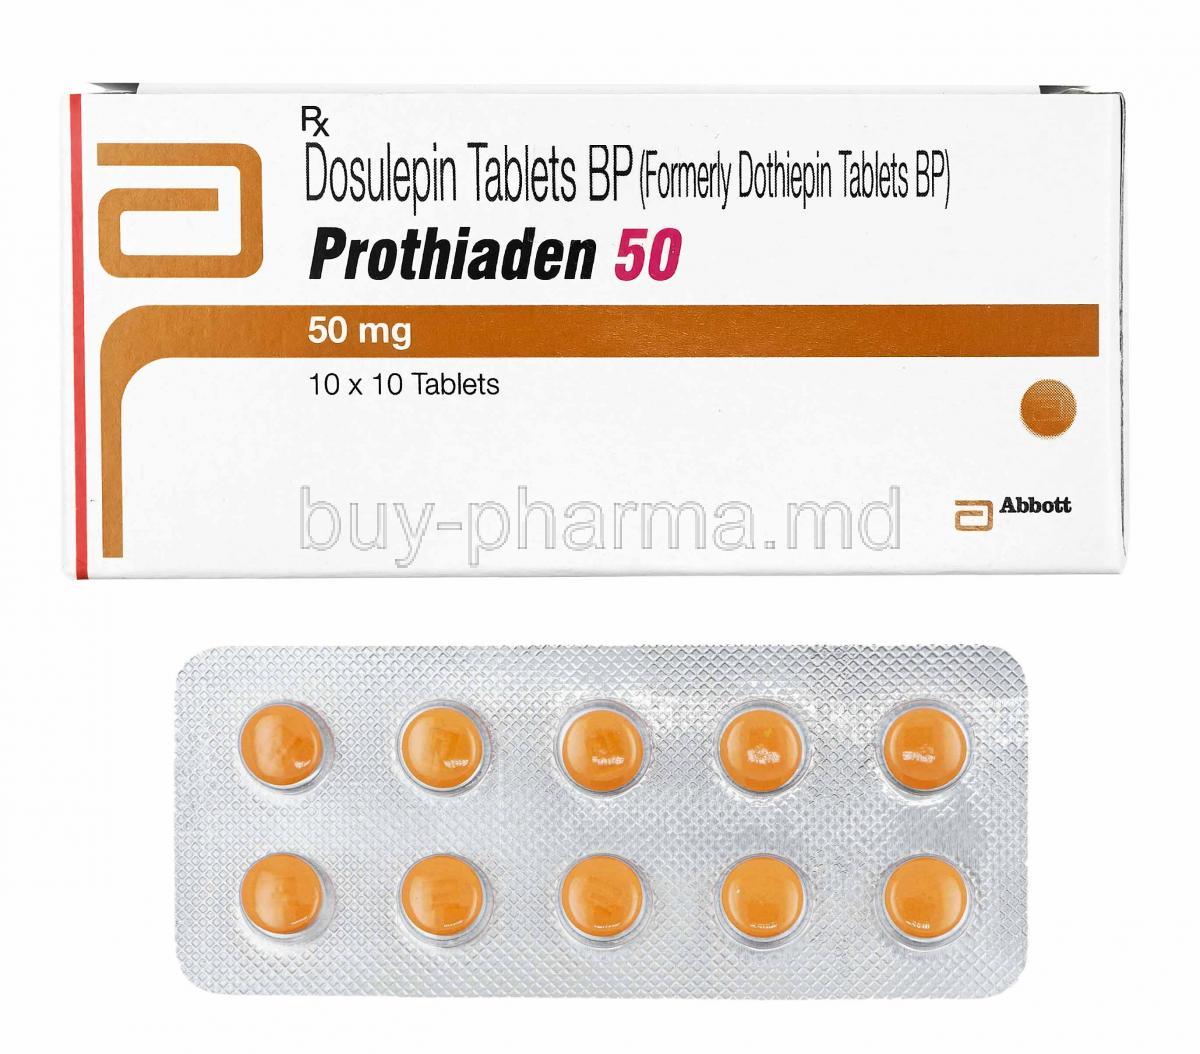 Prothiaden, Dosulepin 50mg box and tablets